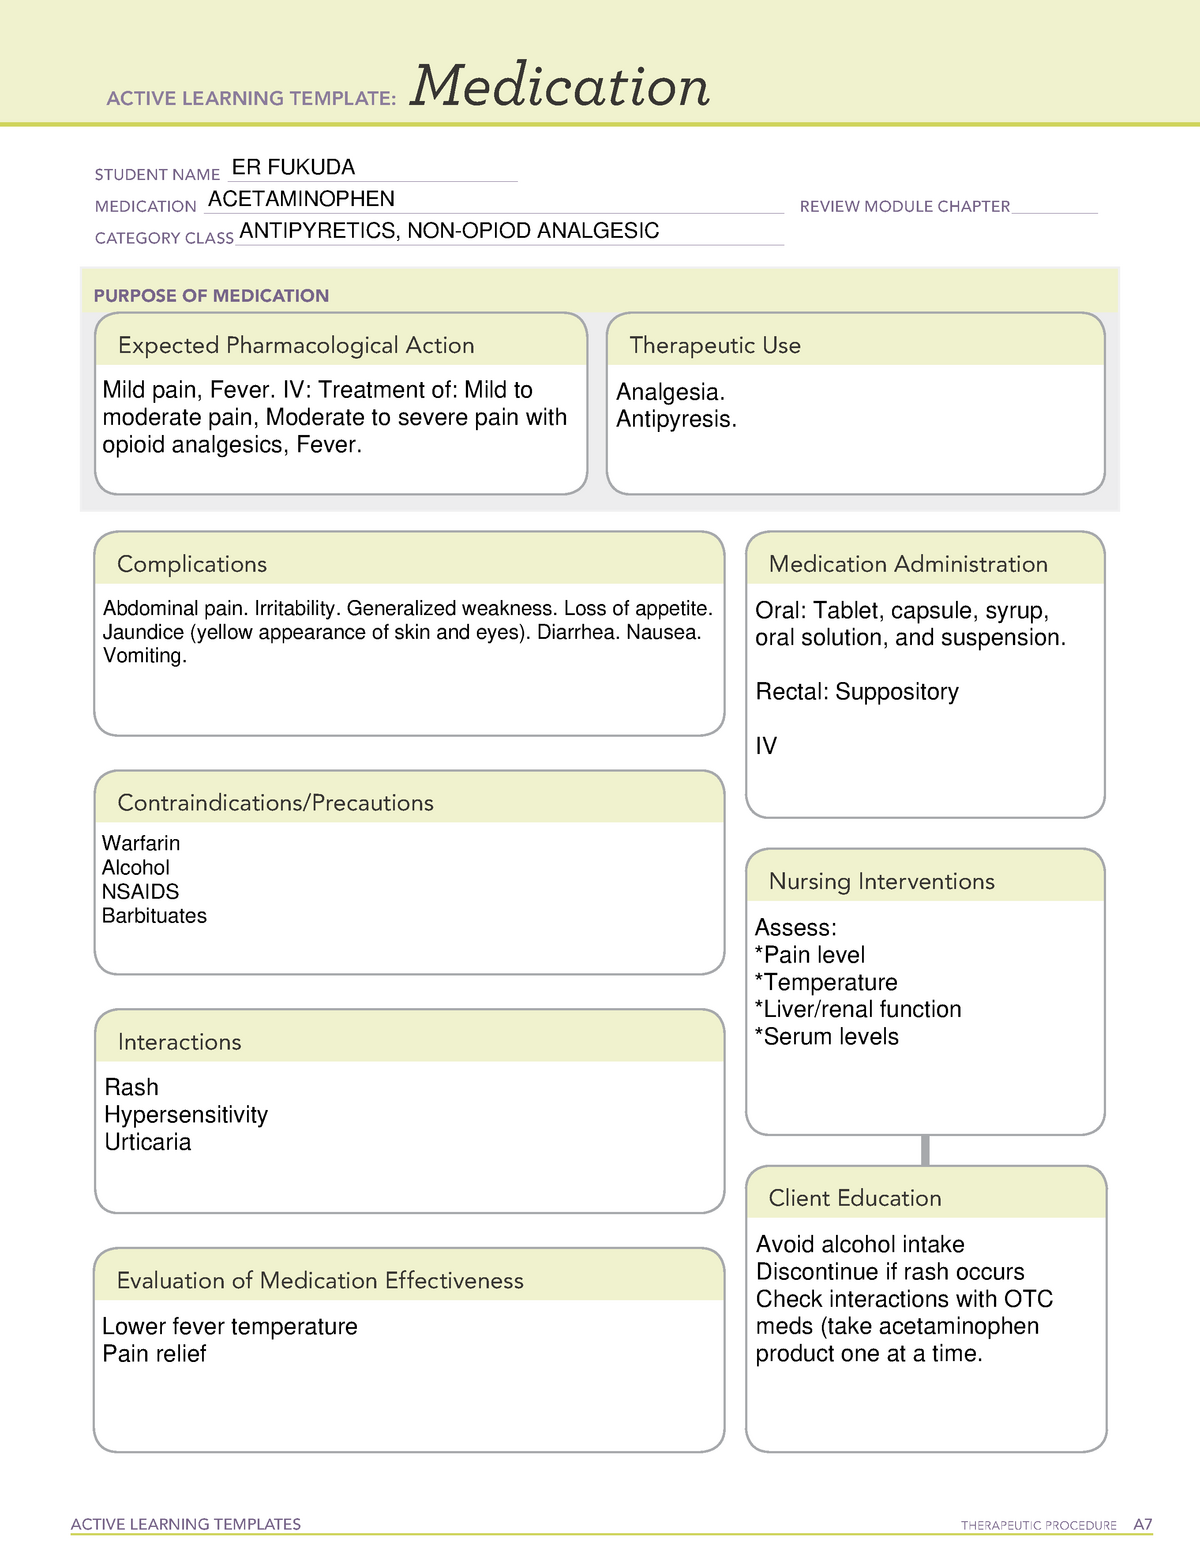 Medication PP Active Learning Templates ACTIVE LEARNING TEMPLATES